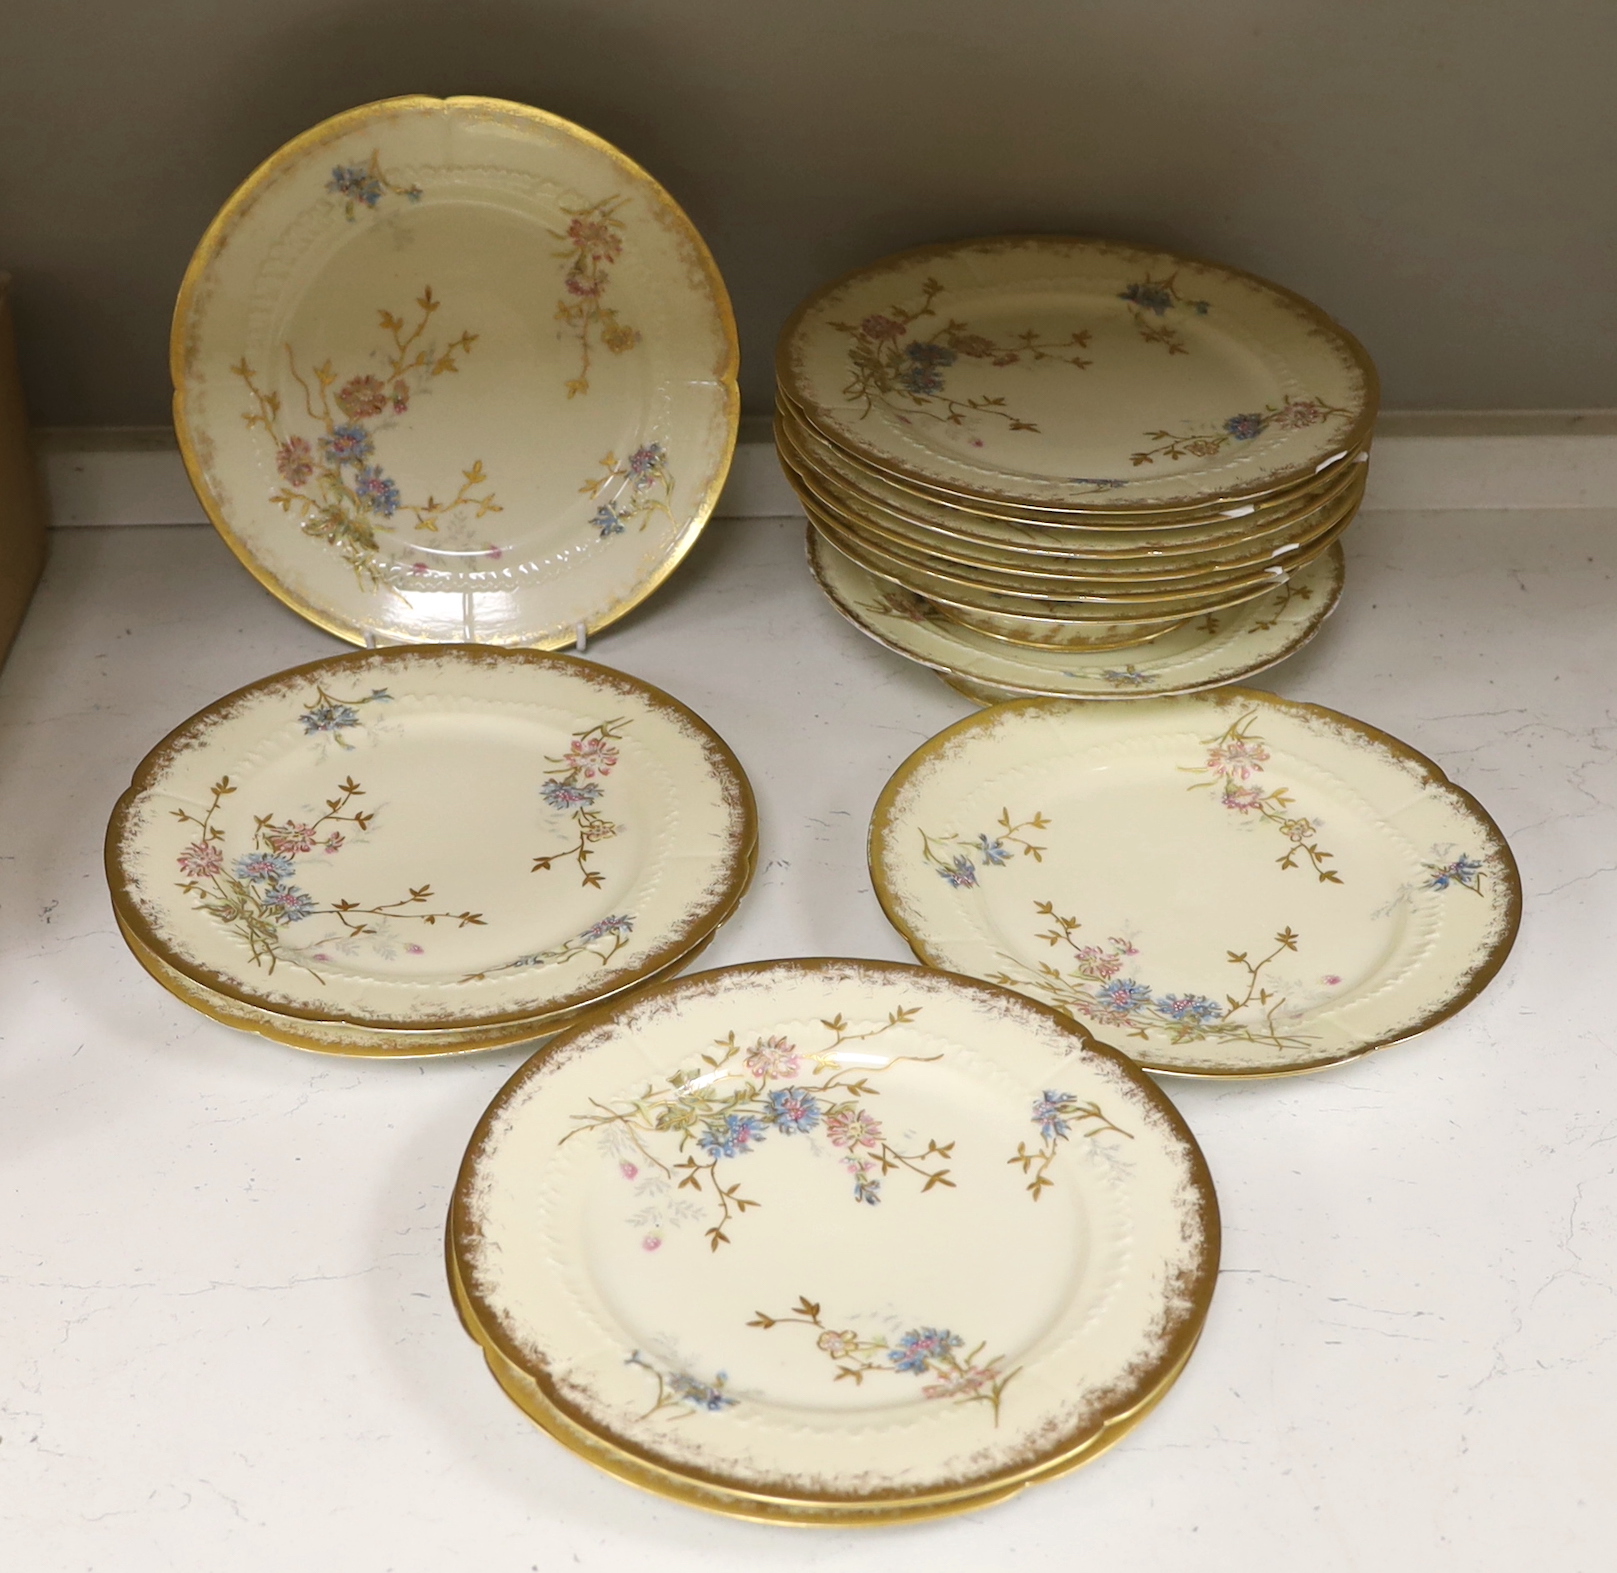 Thirteen Limoges style porcelain dessert plates, two on pedestal bases, gilt decorated with